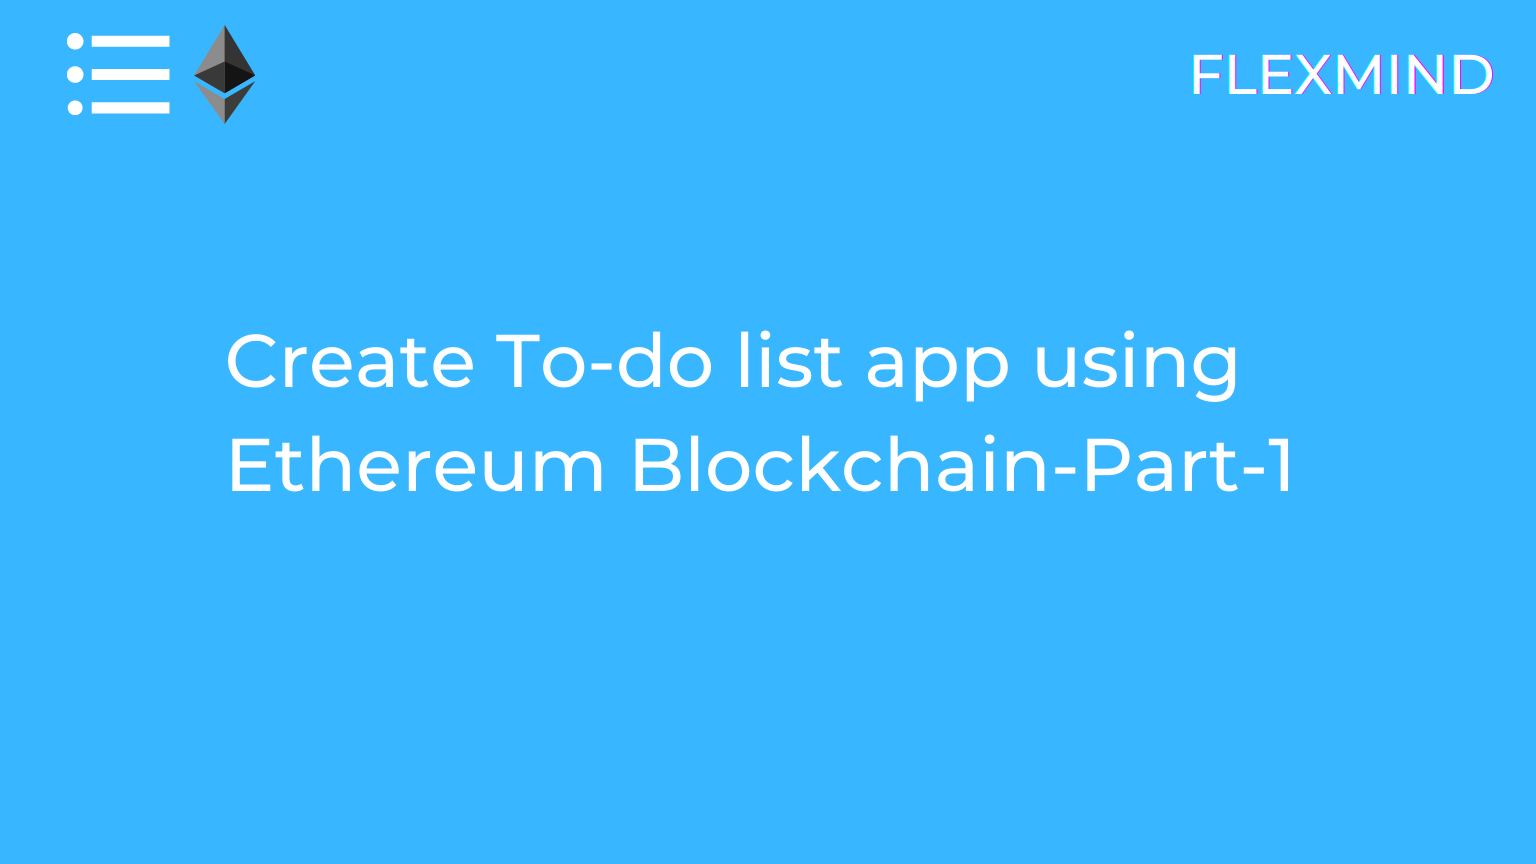 To-do list using Ethereum